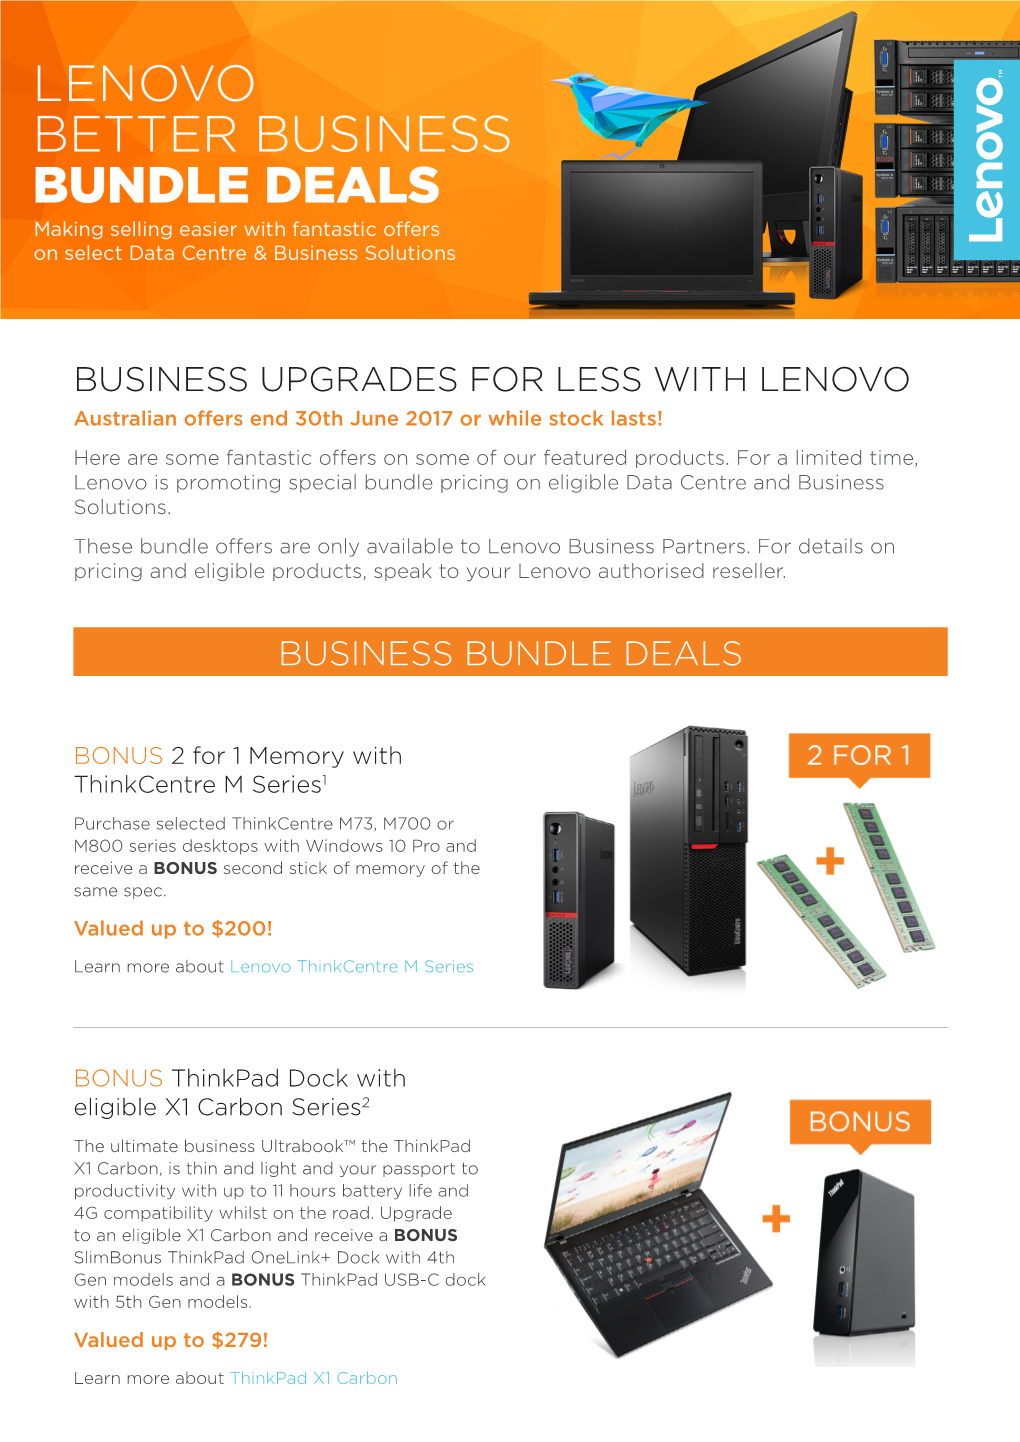 Business Upgrades for Less with Lenovo Business